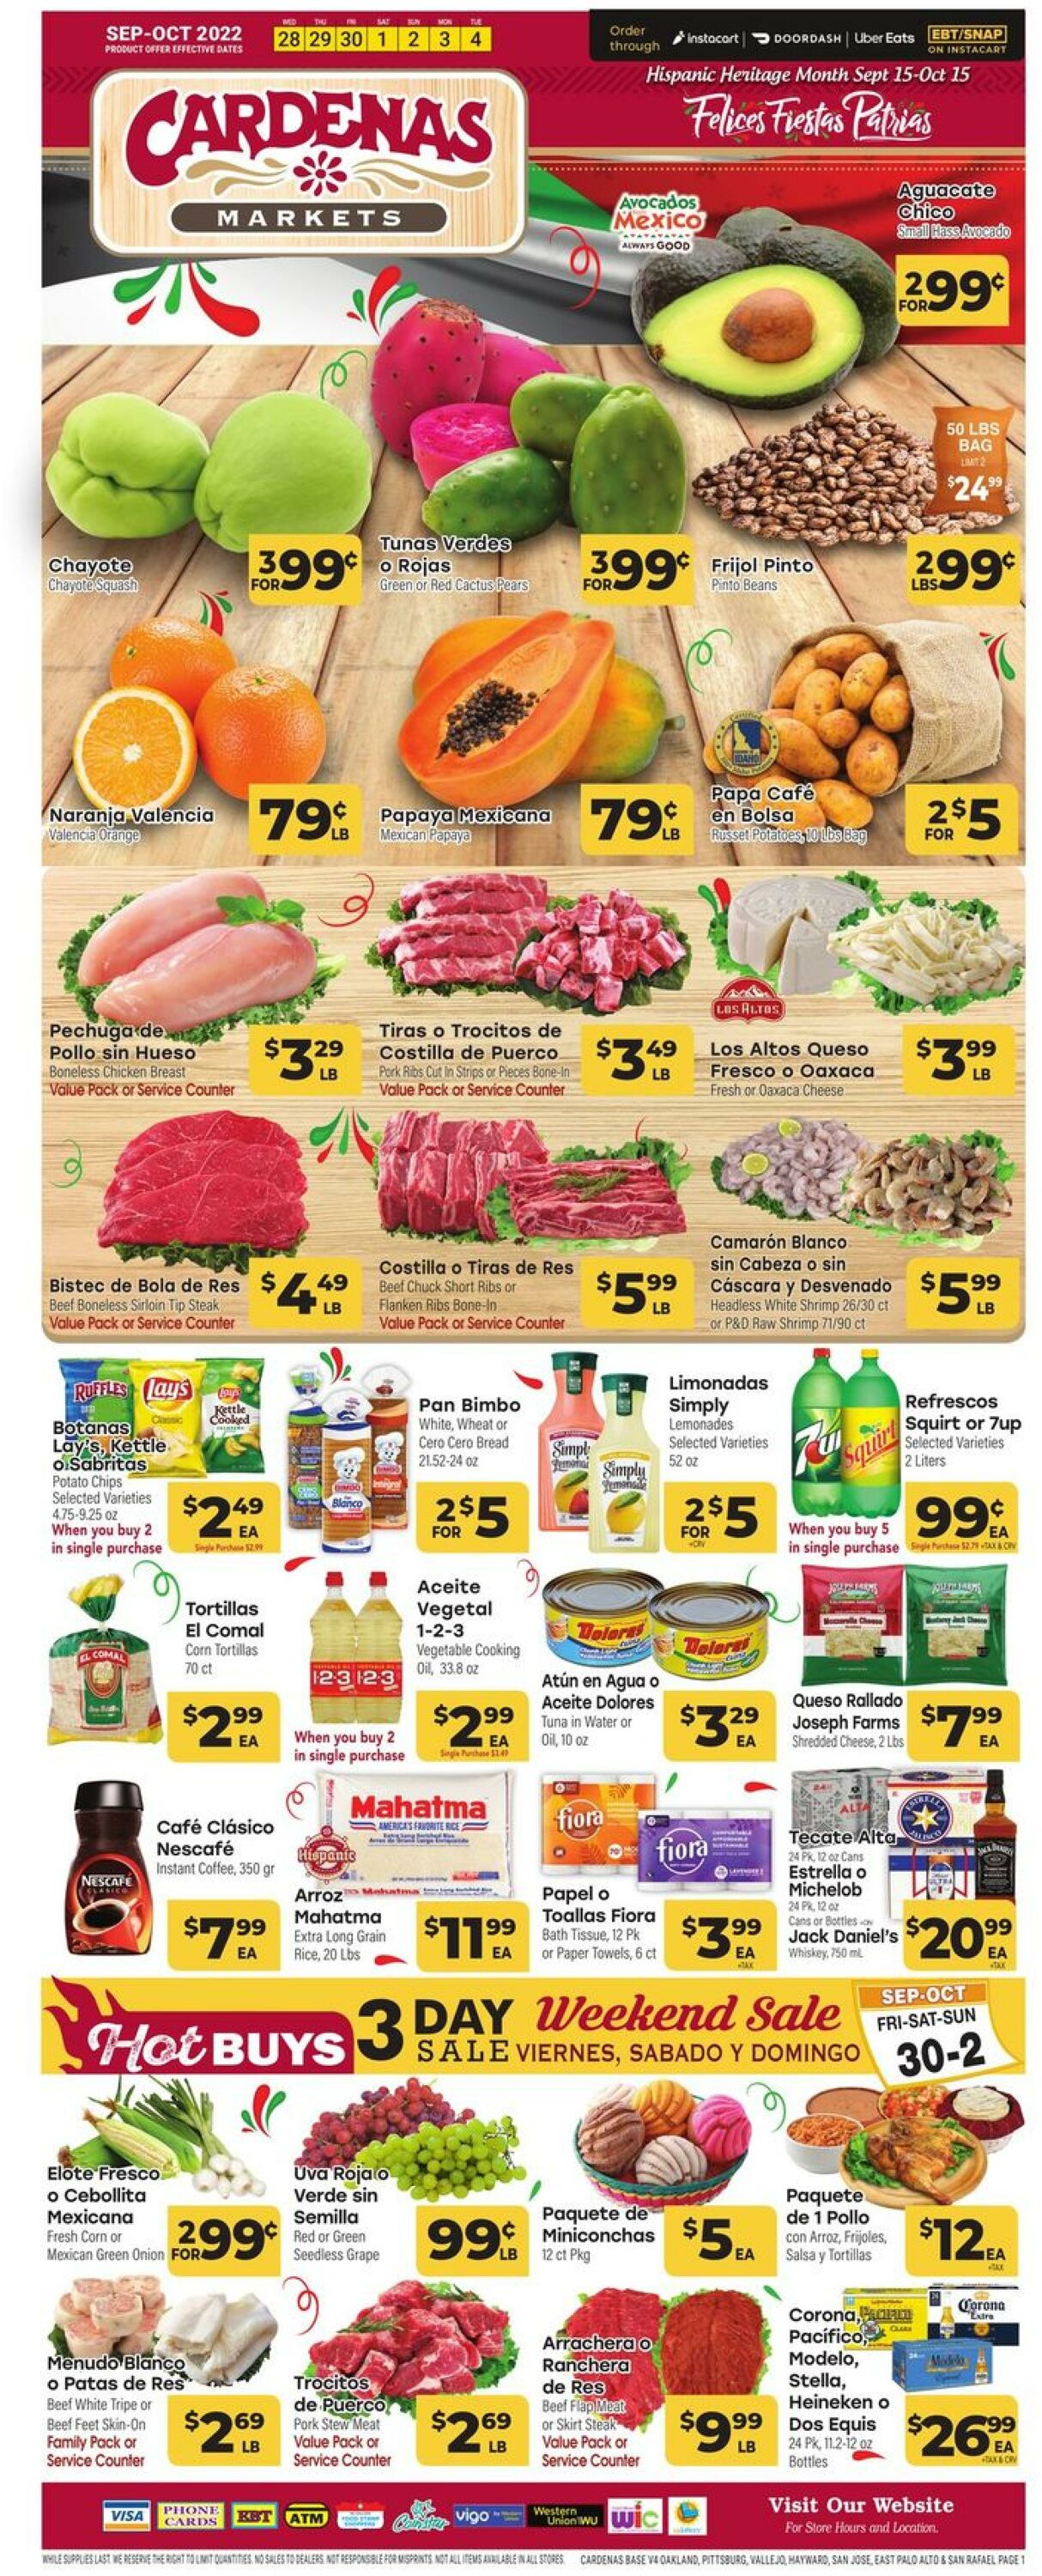 Cardenas Markets Promotional weekly ads